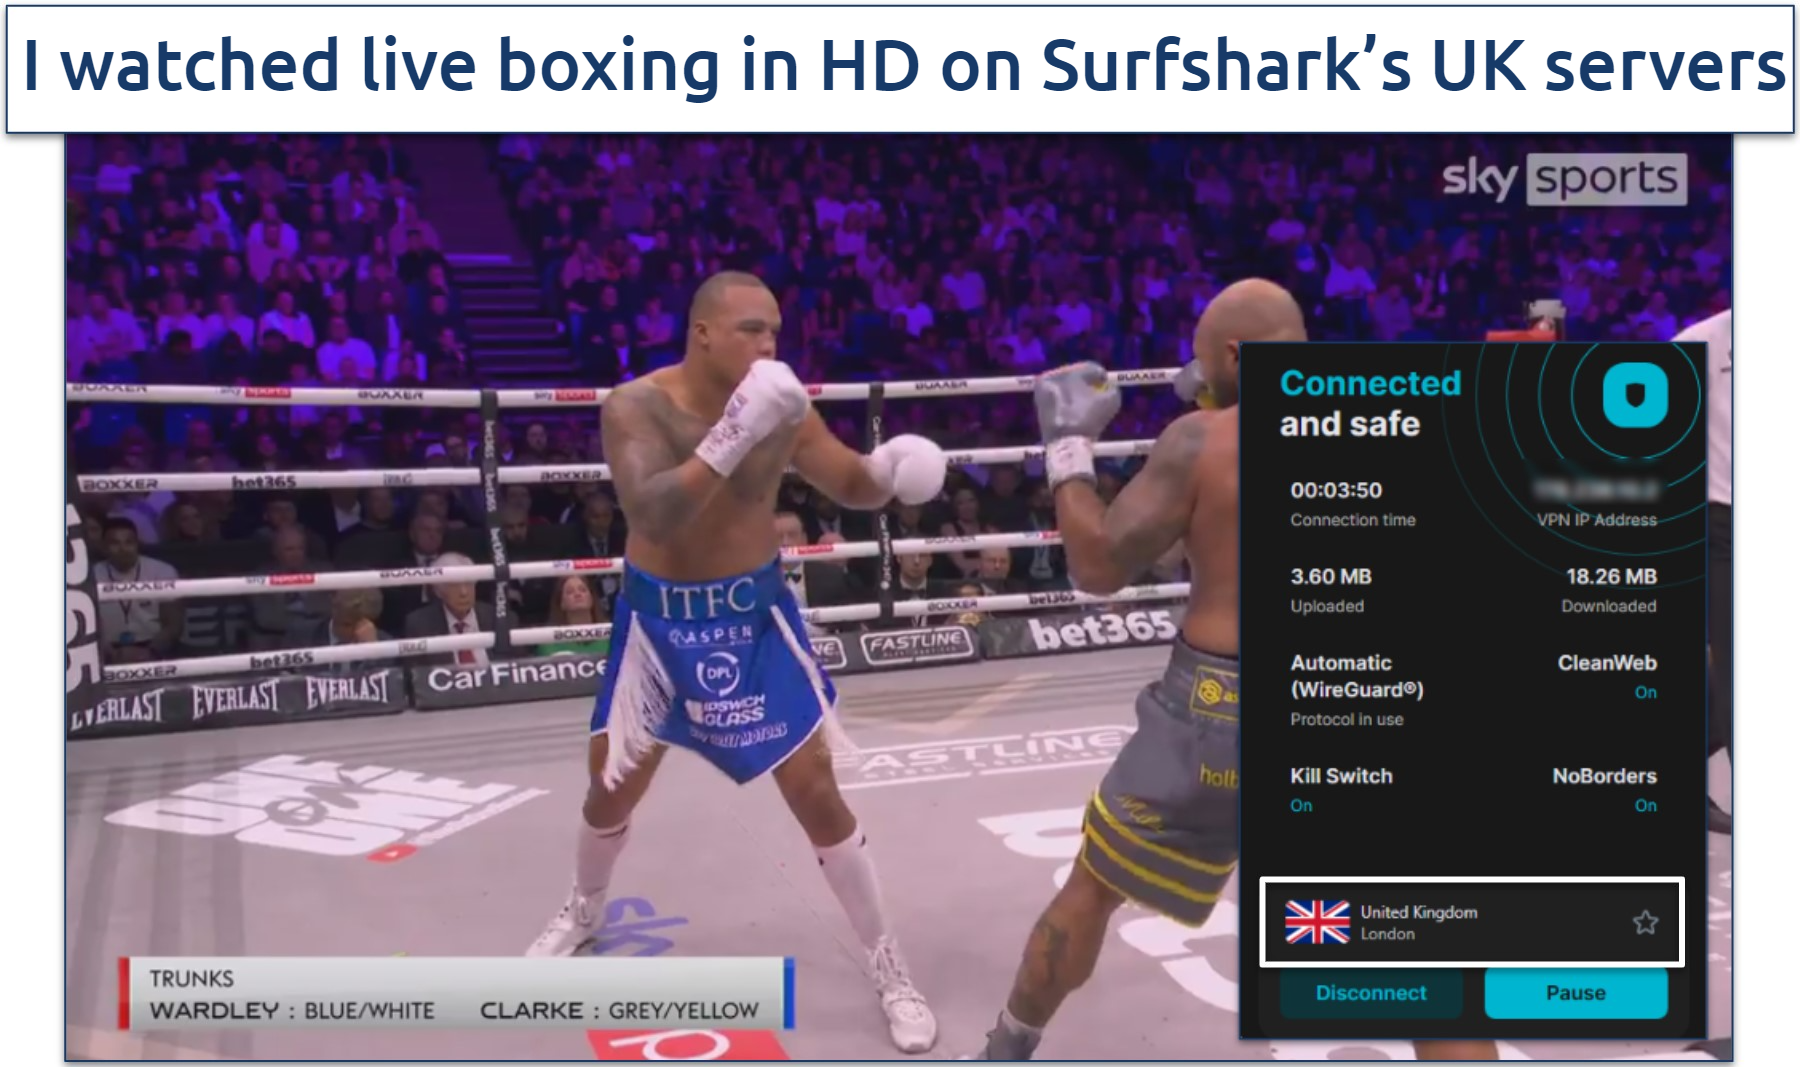 Screenshot of streaming boxing match on Sky Sports app with Surfshark UK server